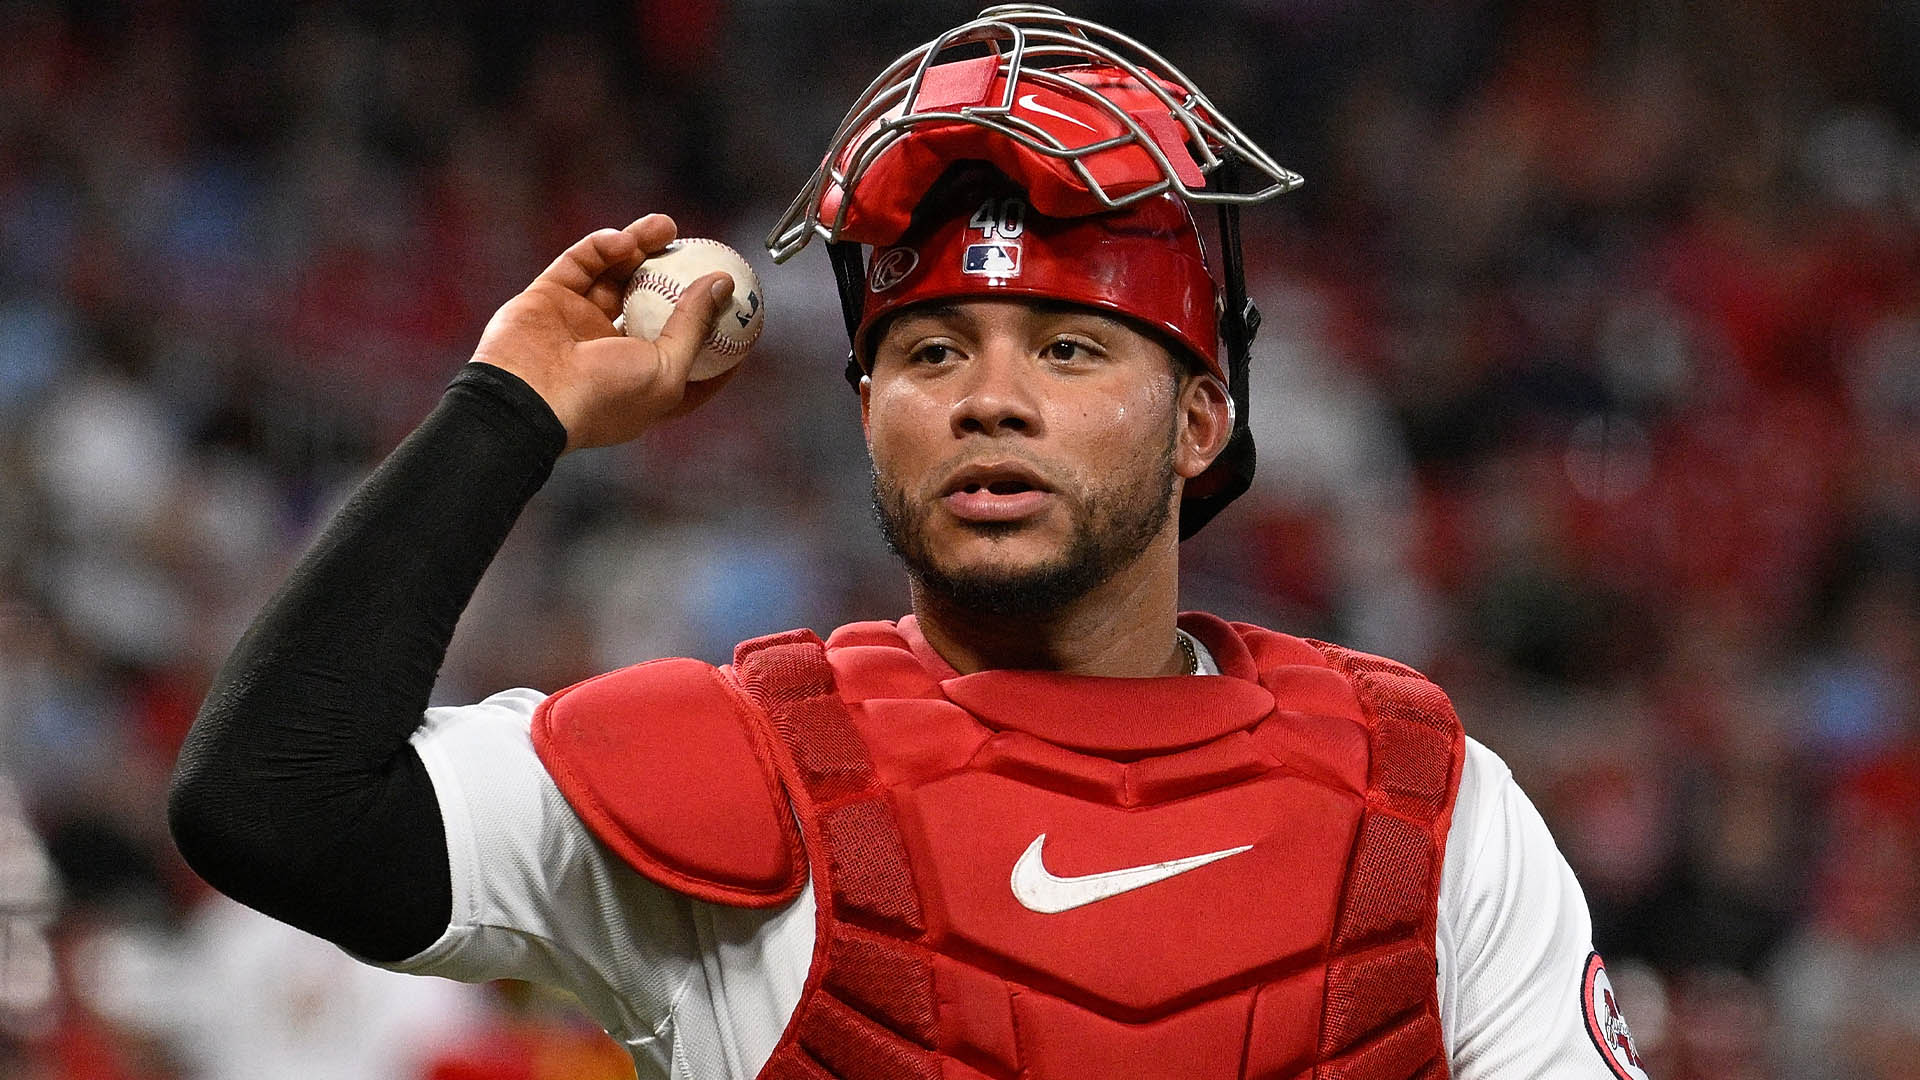 Cardinals' Willson Contreras ready for 'emotional' return to